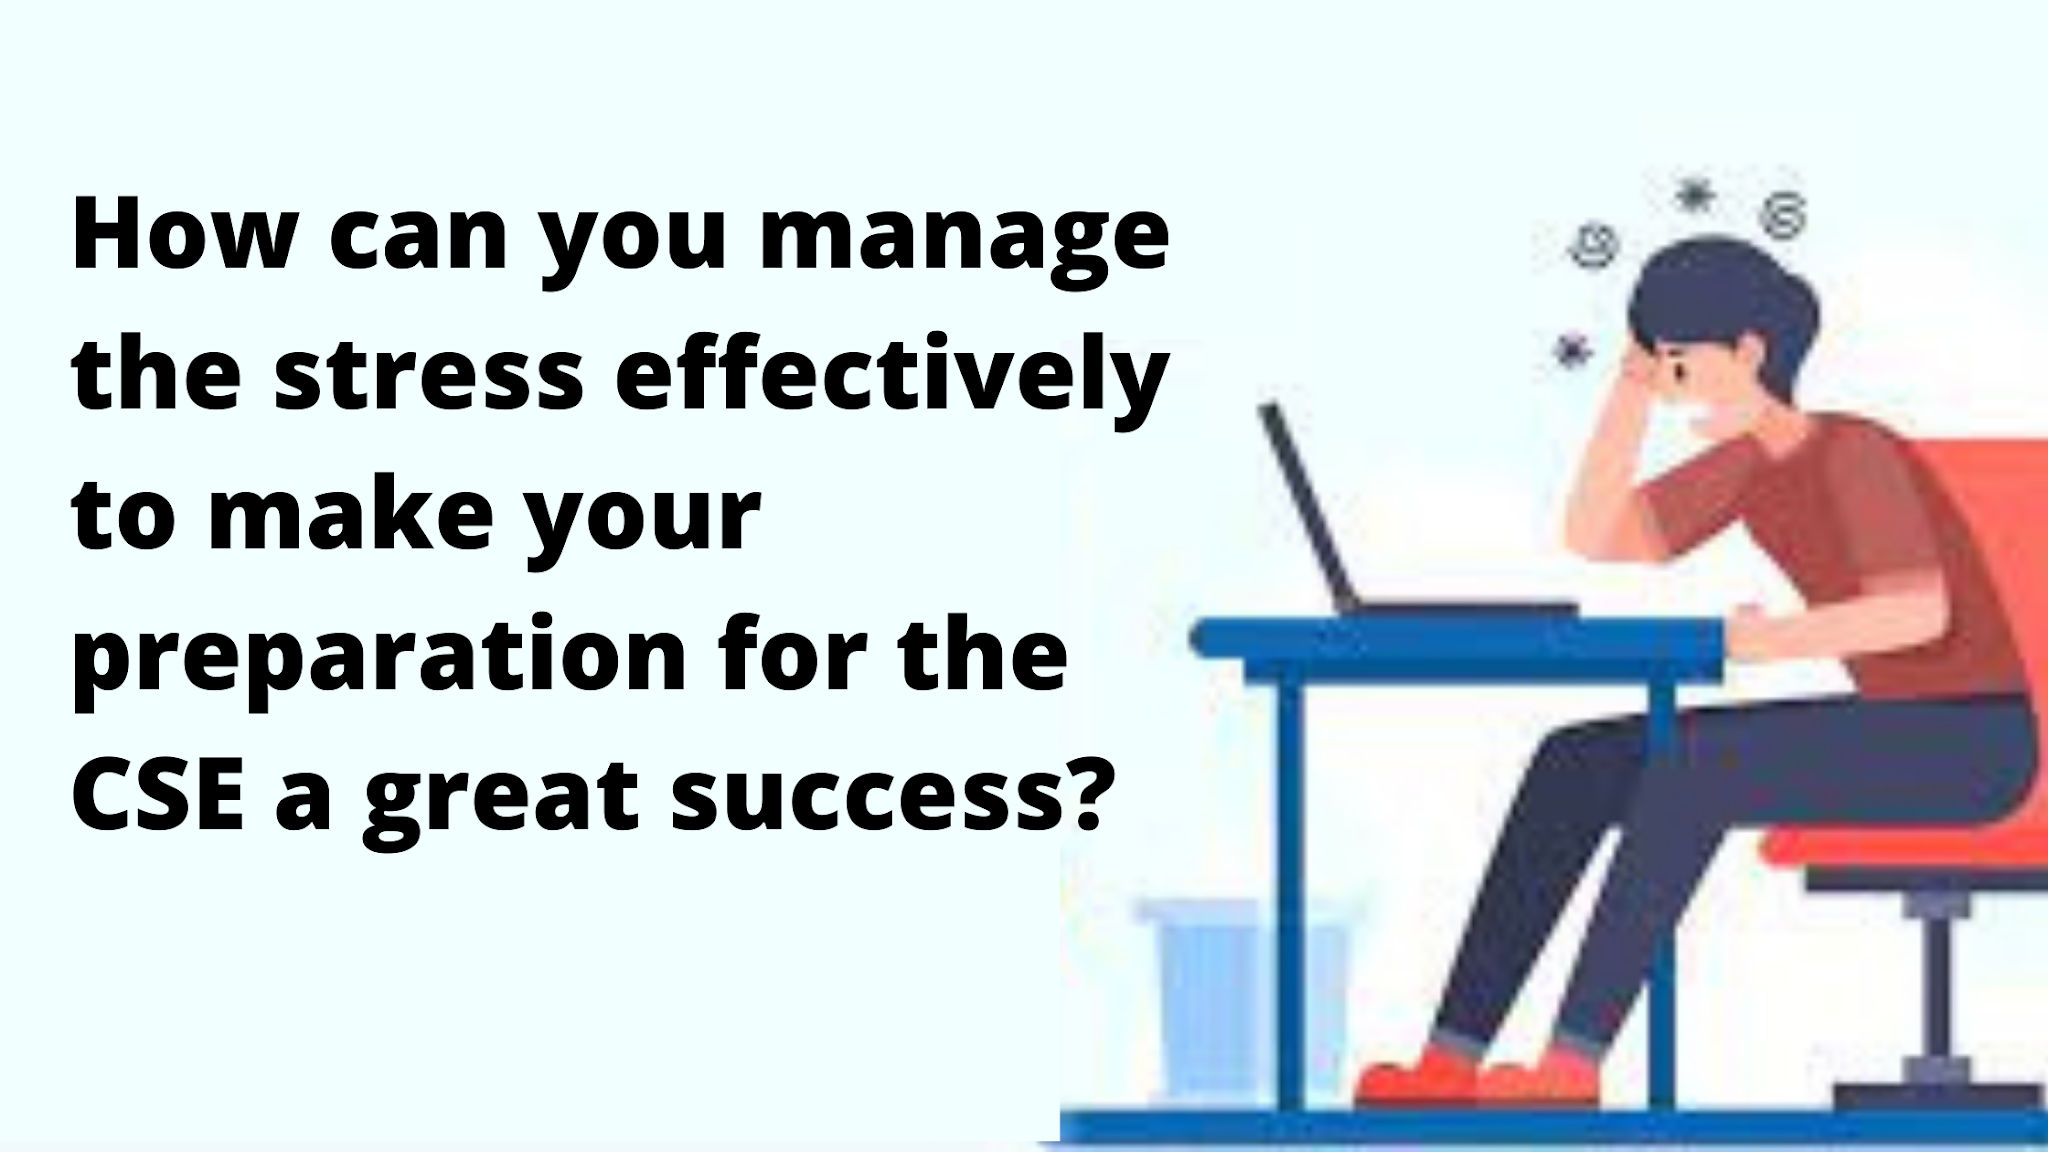 How can you manage the stress effectively to make your preparation for the CSE a great success?